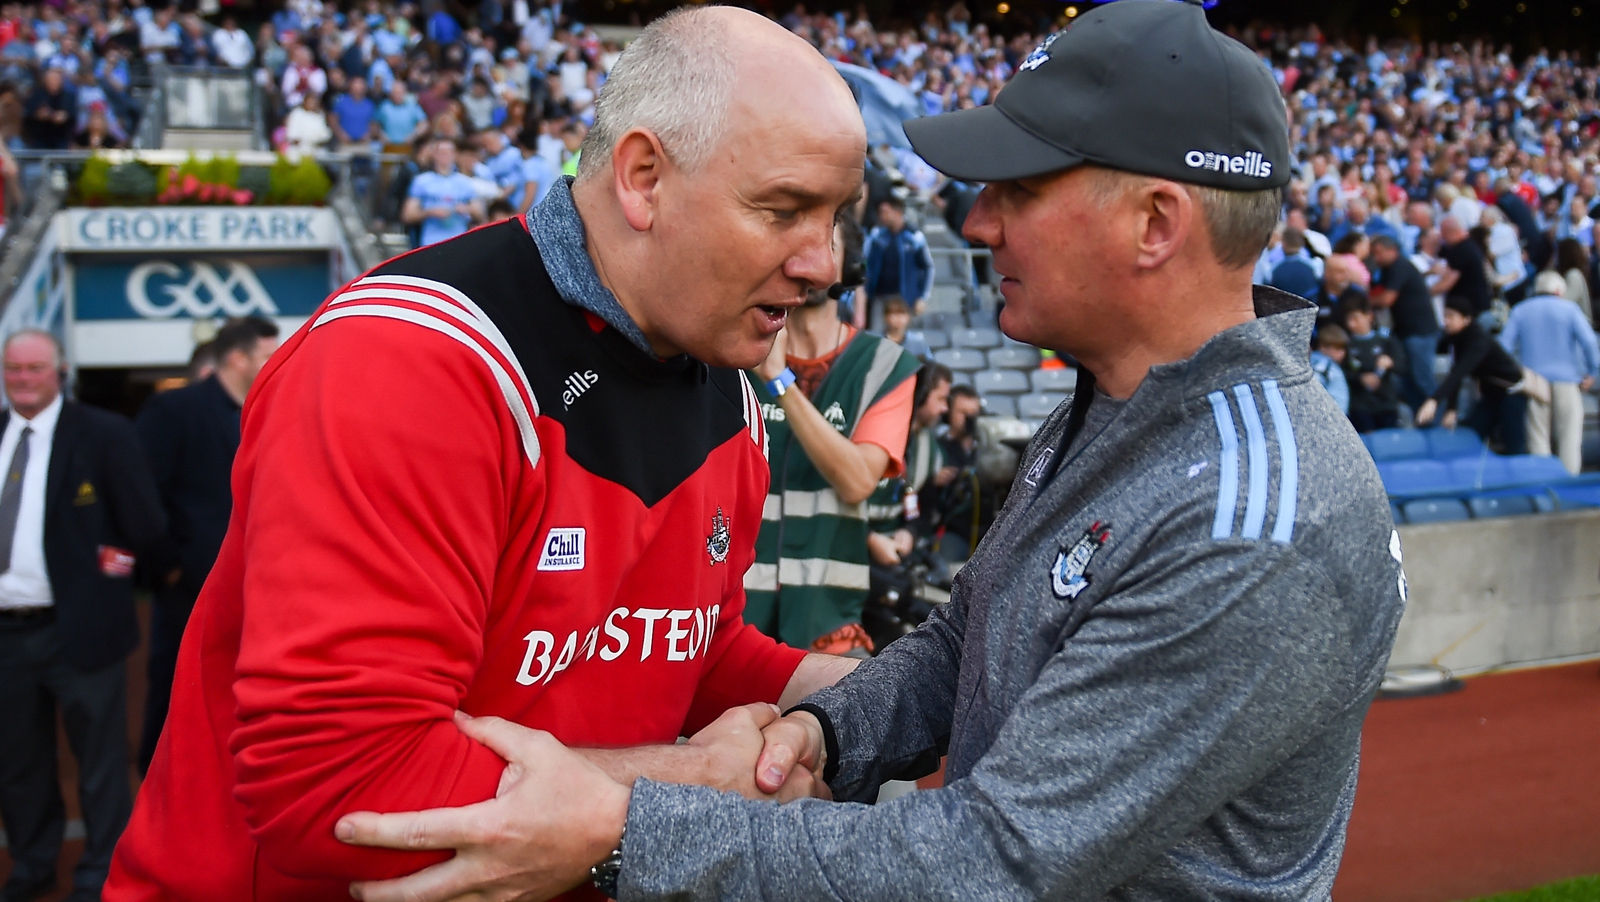 McCarthy and Gavin both have praise for Cork's display